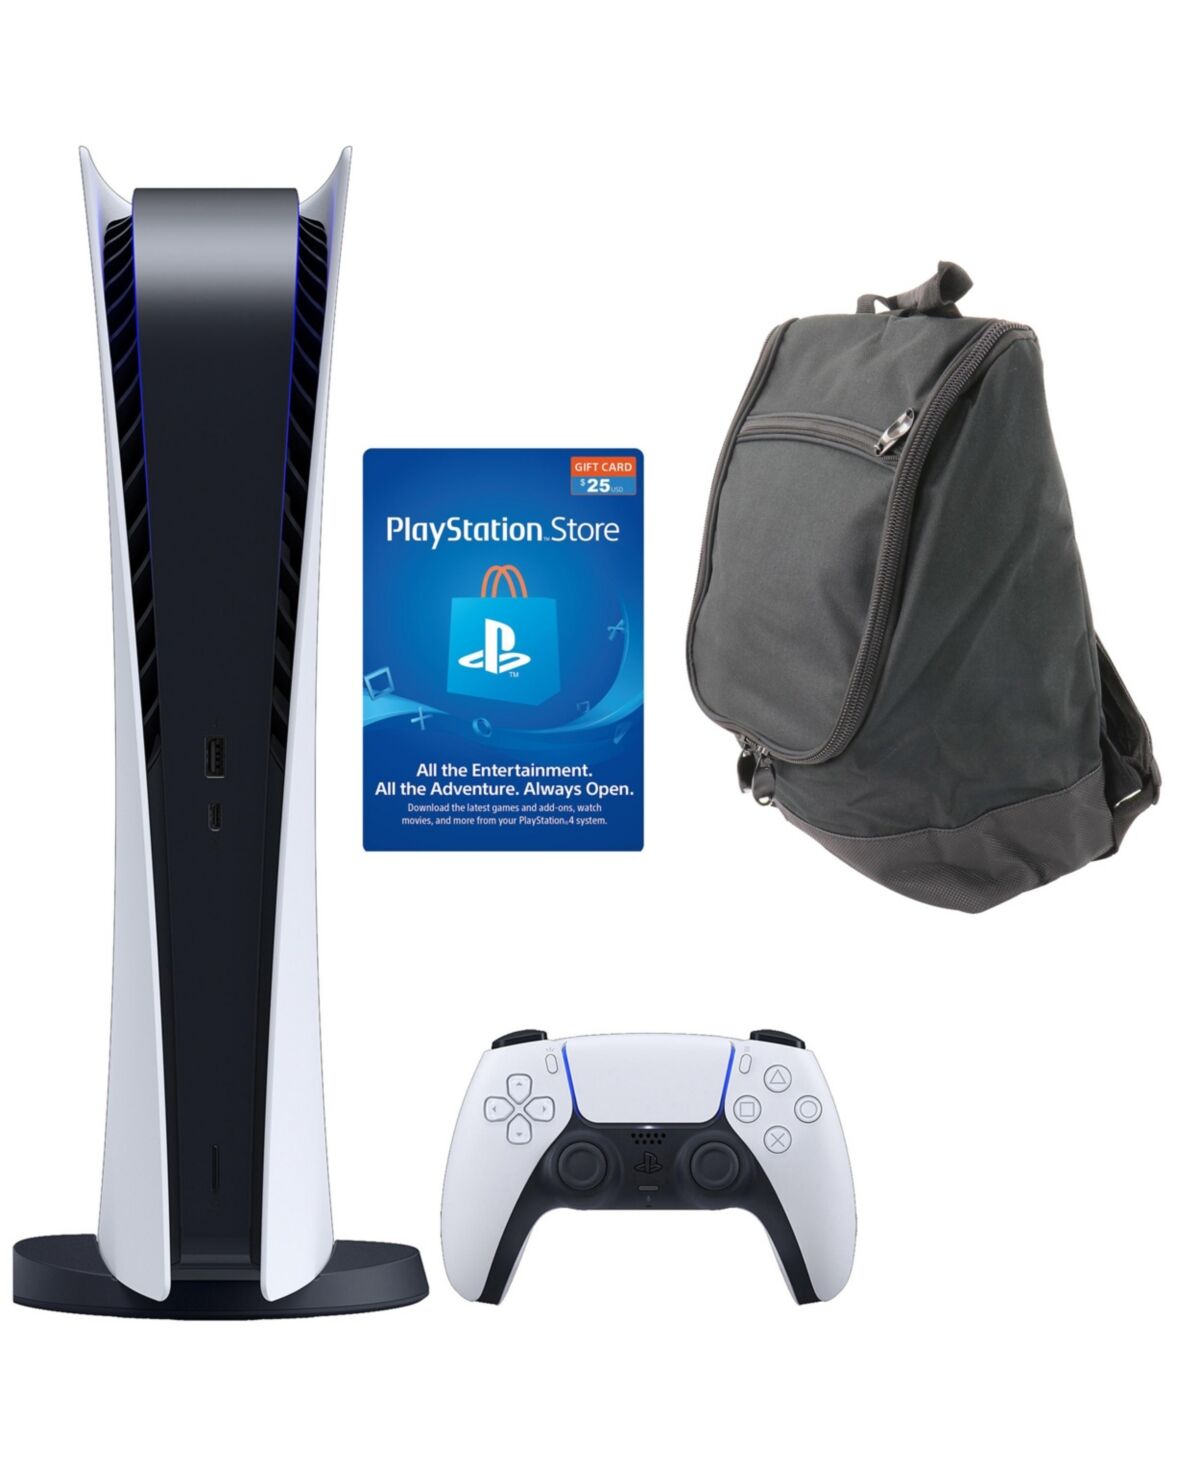 PlayStation 5 Digital Console w/ $25 Psn Card and Carry Bag - Open White